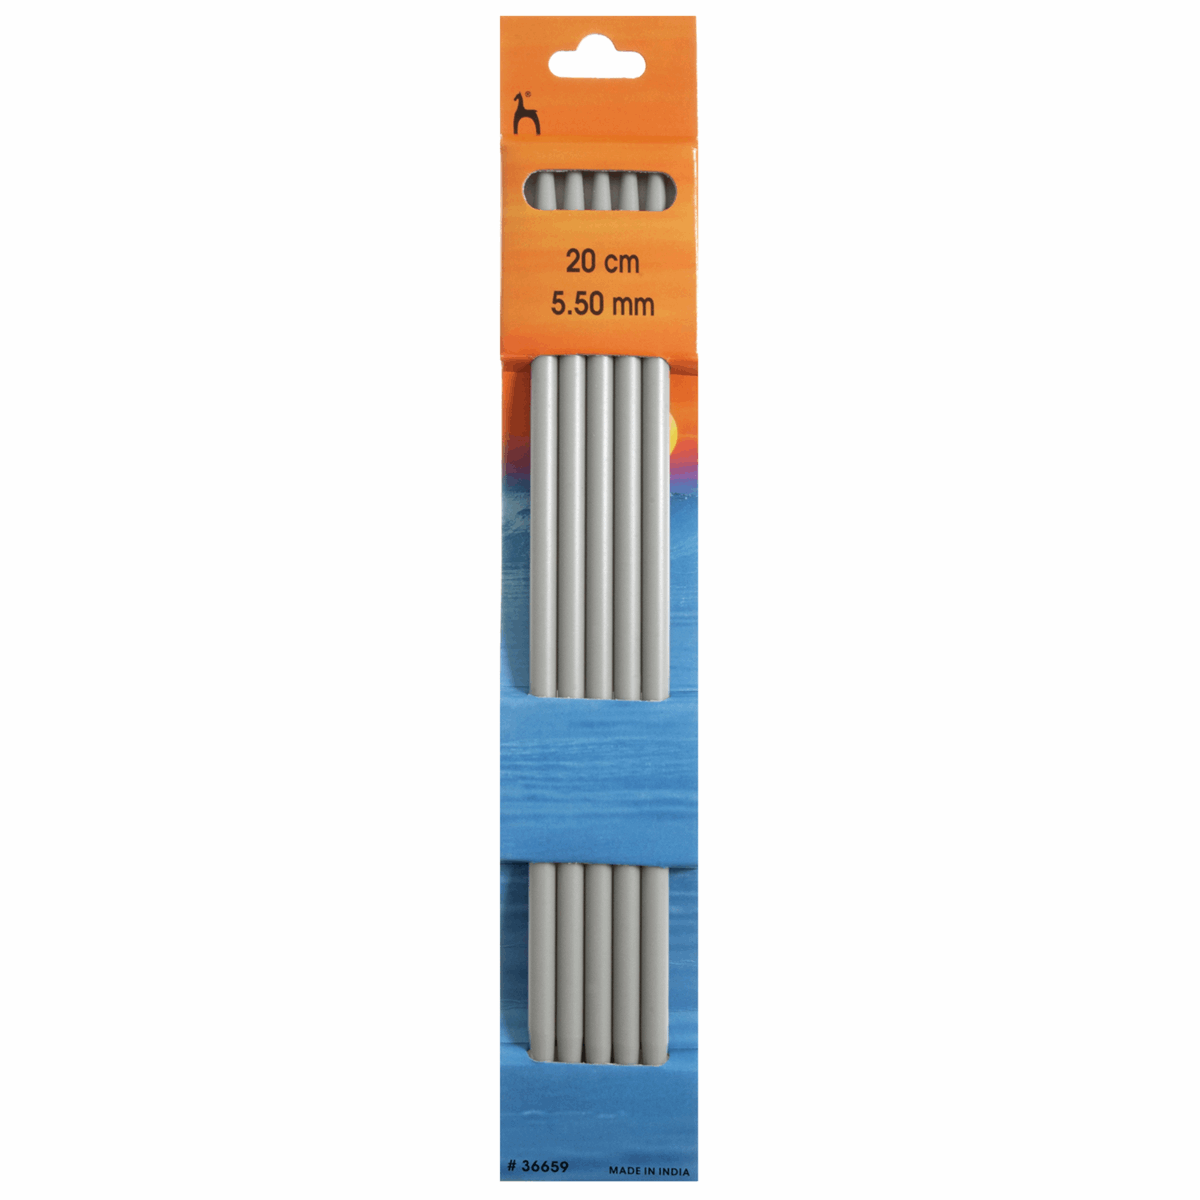 PONY Double-Ended Knitting Pins - 20cm x 5.50mm (Set of 5)